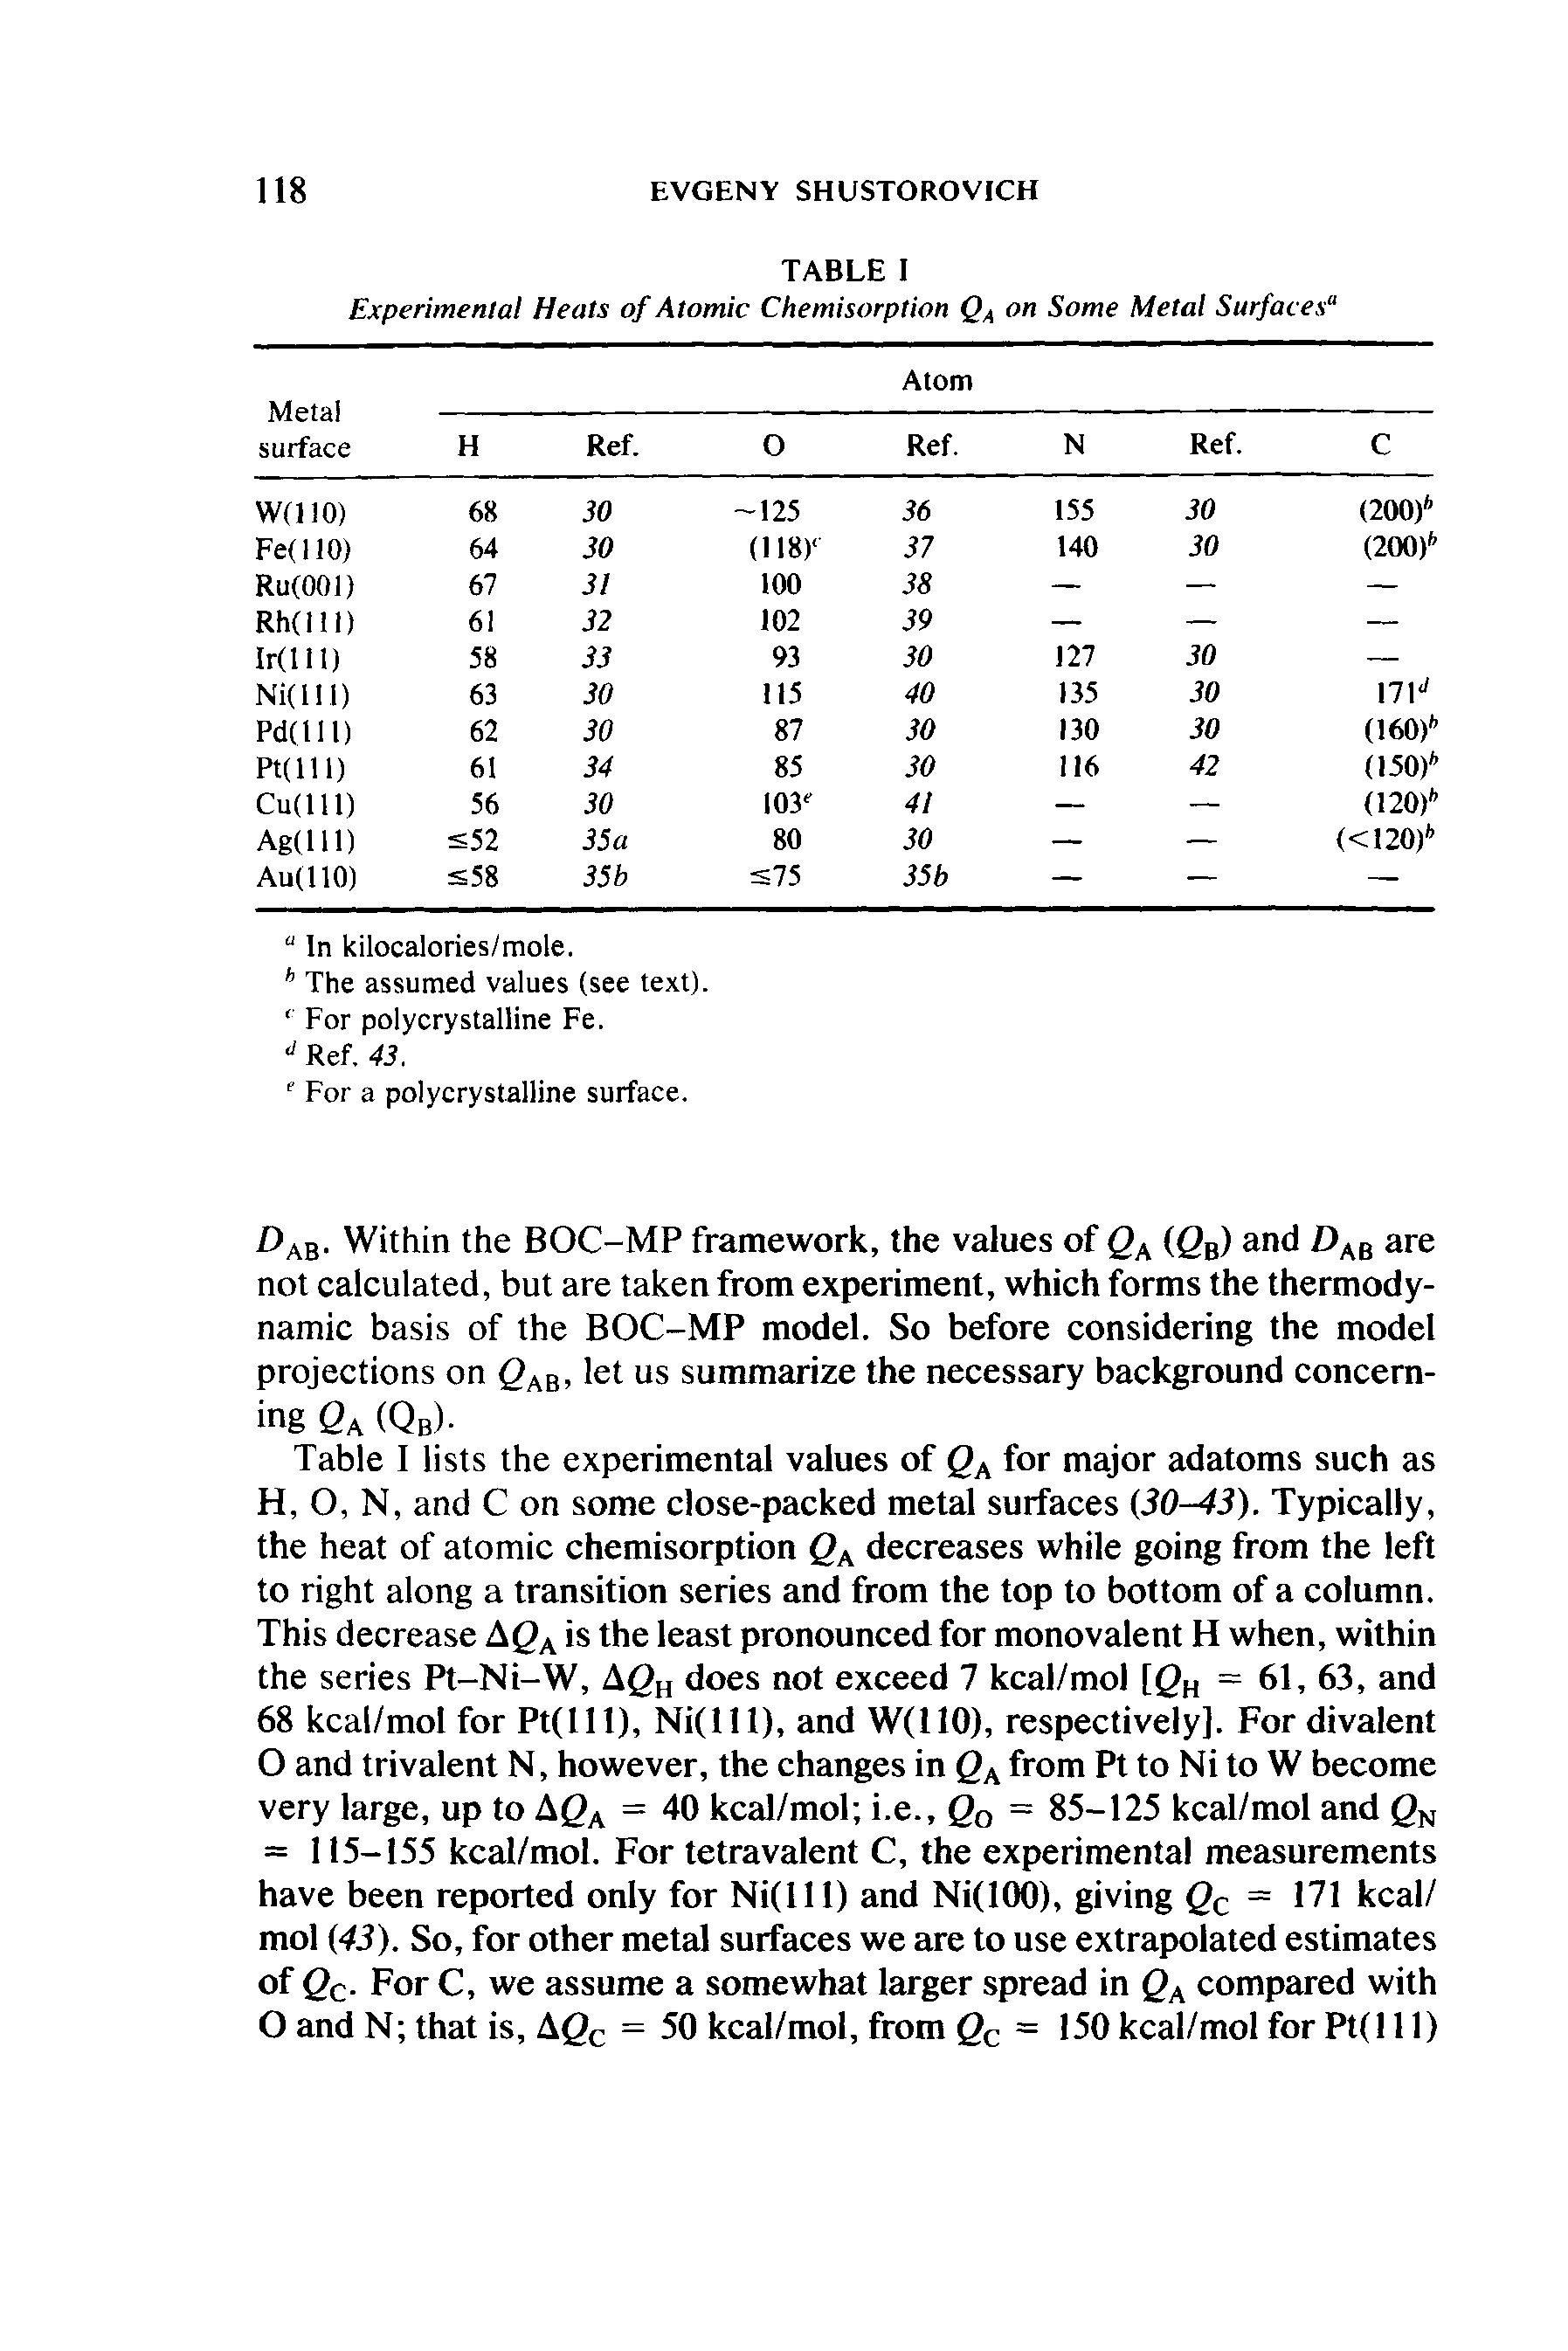 Table I lists the experimental values of QA for major adatoms such as H, O, N, and C on some close-packed metal surfaces (30-43). Typically, the heat of atomic chemisorption QA decreases while going from the left to right along a transition series and from the top to bottom of a column. This decrease AQA is the least pronounced for monovalent H when, within the series Pt-Ni-W, AQH does not exceed 7 kcal/mol [QH = 61, 63, and 68 kcal/mol for Pt(lll), Ni(lll), and W(110), respectively]. For divalent O and trivalent N, however, the changes in QA from Pt to Ni to W become very large, up to AQA = 40 kcal/mol i.e., Qq = 85-125 kcal/mol and (gN = 115-155 kcal/mol. For tetravalent C, the experimental measurements have been reported only for Ni(lll) and Ni(100), giving Qc = 171 kcal/ mol (43). So, for other metal surfaces we are to use extrapolated estimates of Qc. For C, we assume a somewhat larger spread in QA compared with O and N that is, A<2C = 50 kcal/mol, from Qc = 150 kcal/mol for Pt(l 11)...